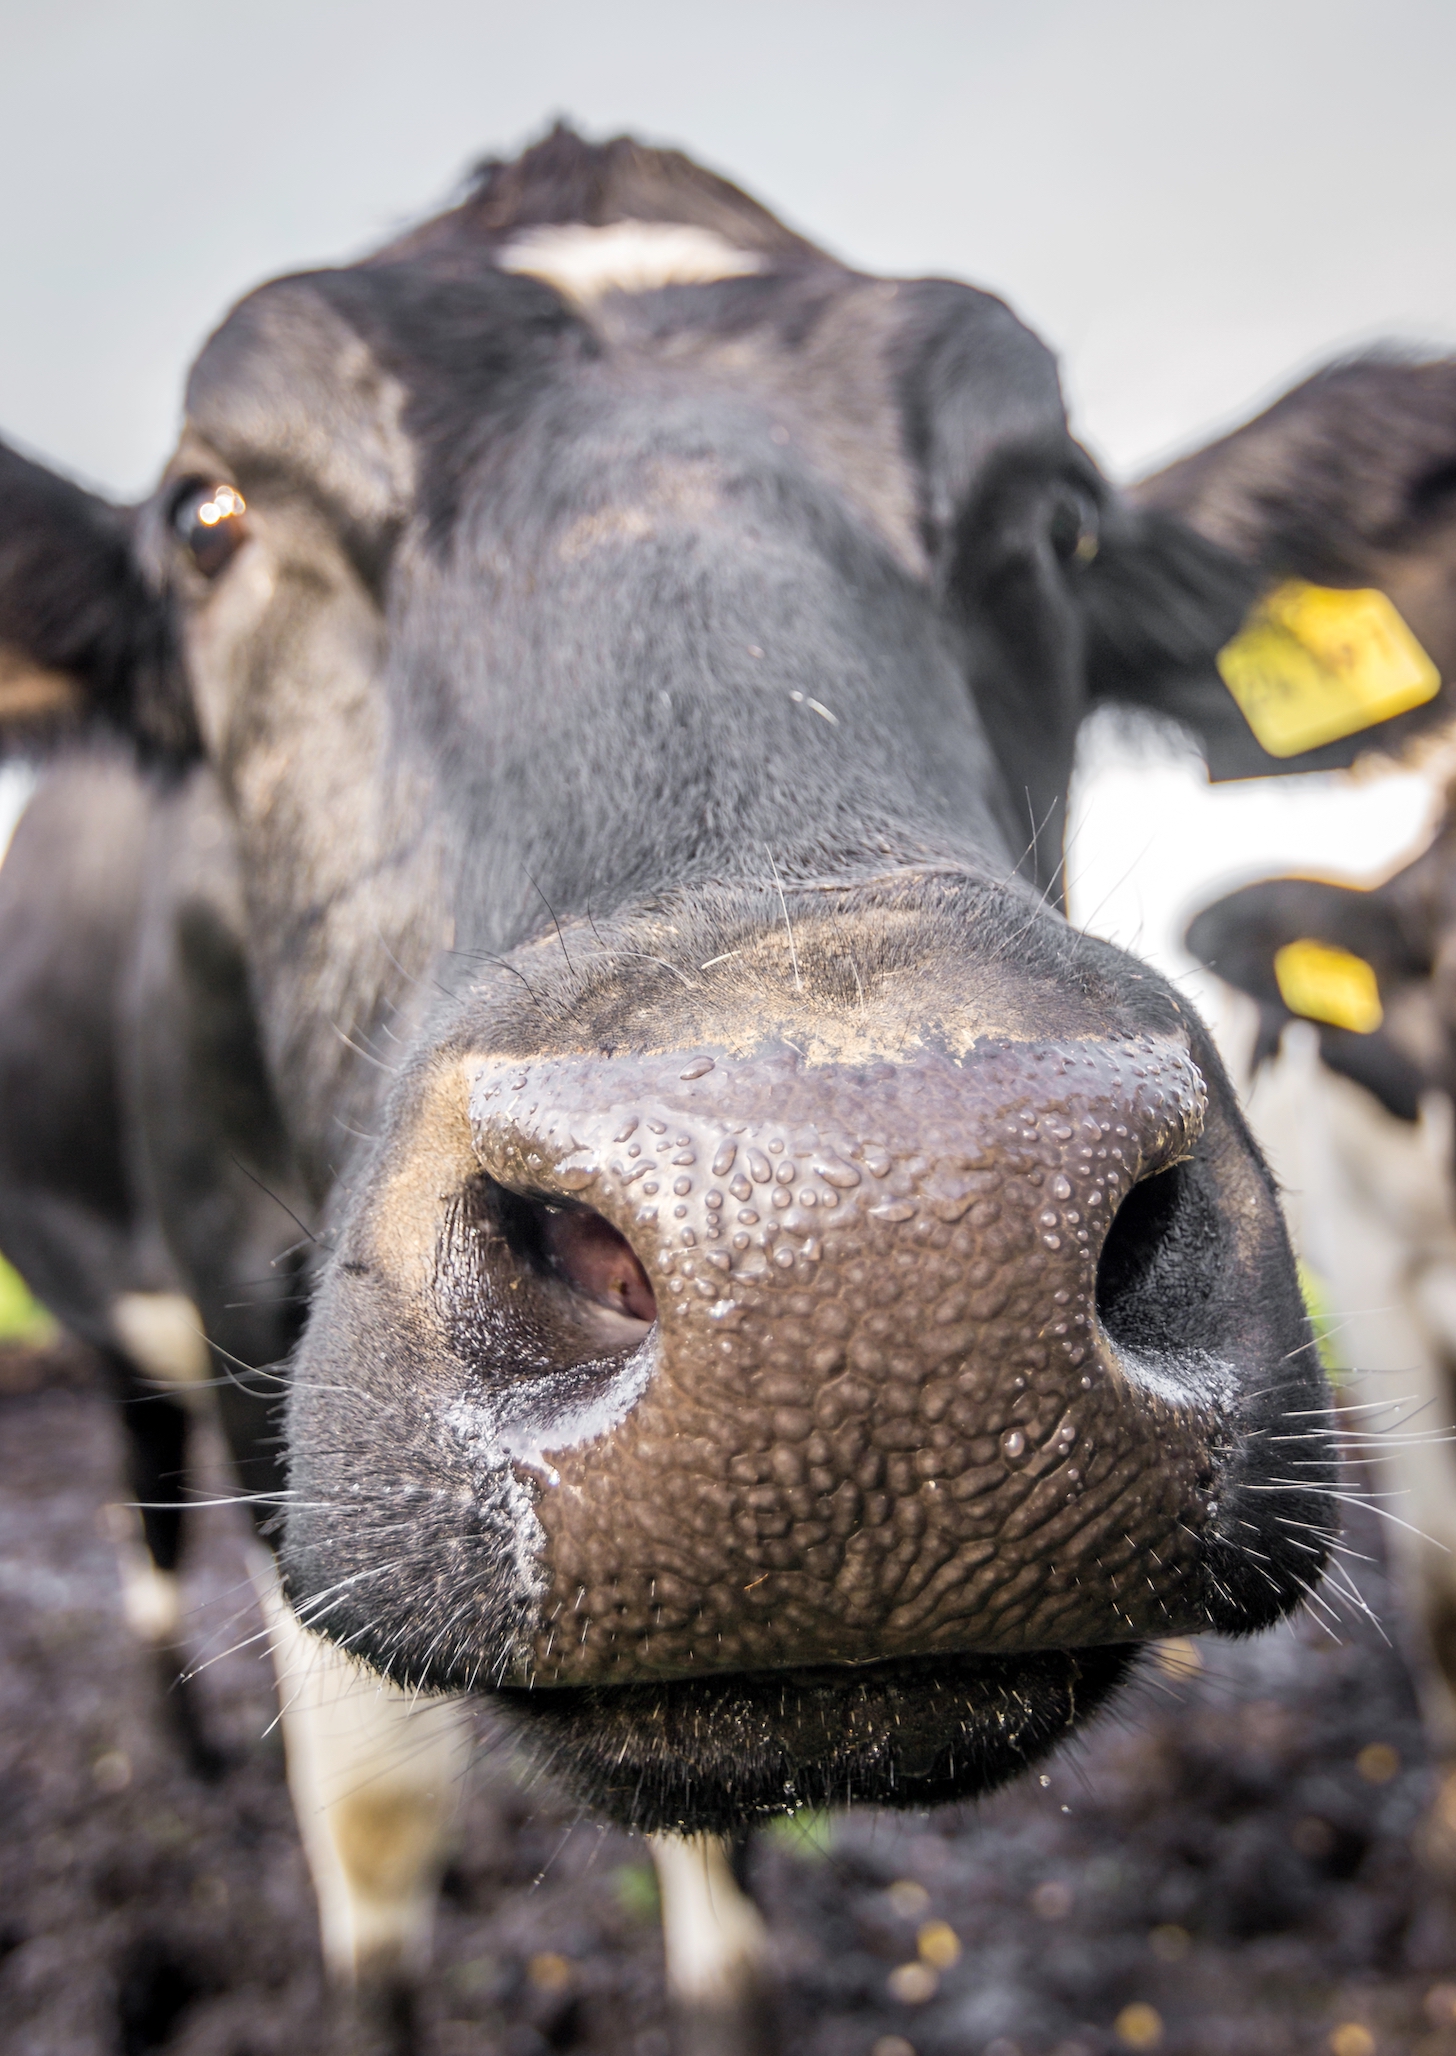 Close up of a cow's face.